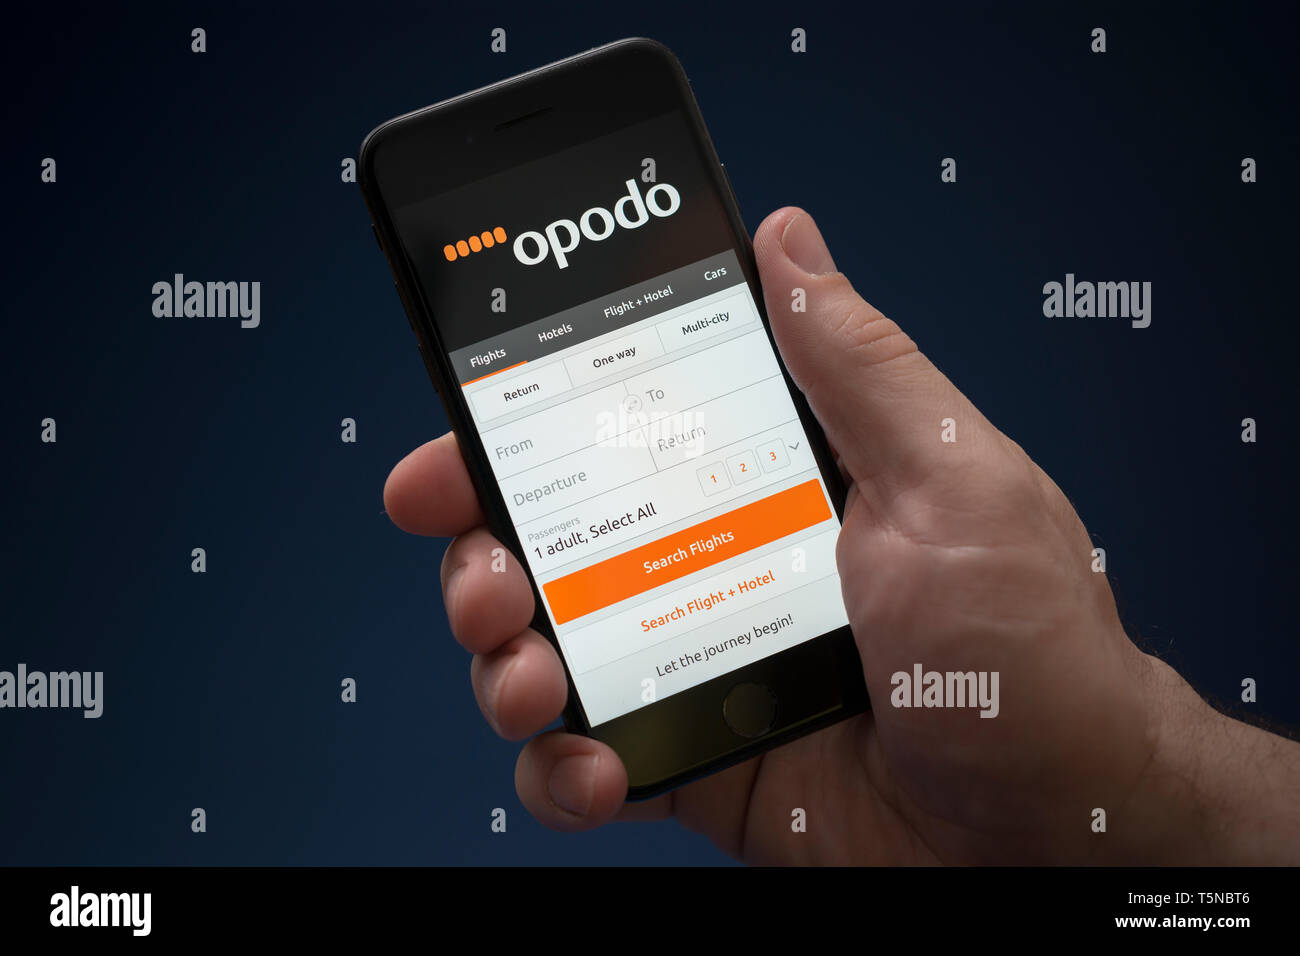 A man looks at his iPhone which displays the Opodo logo (Editorial use only  Stock Photo - Alamy